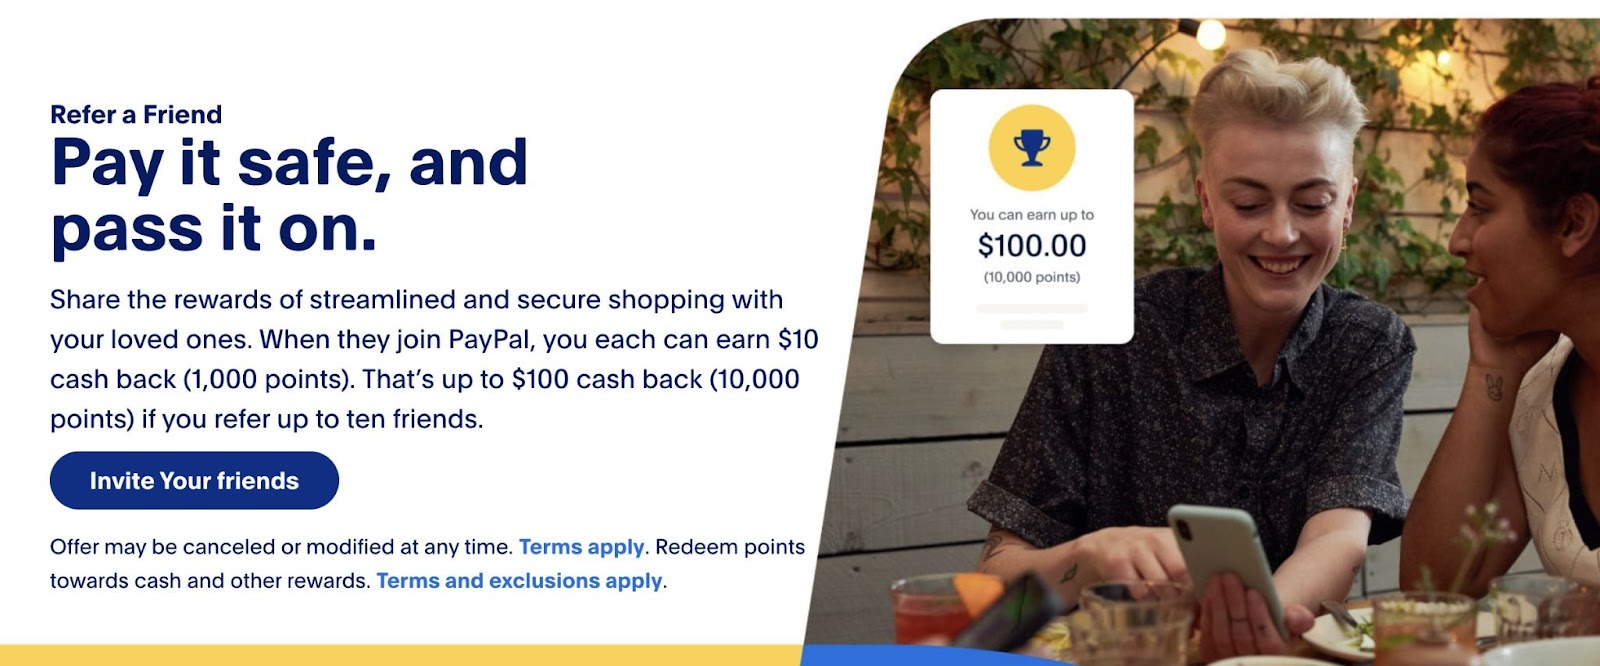 PayPal's "Refer a Friend" landing page